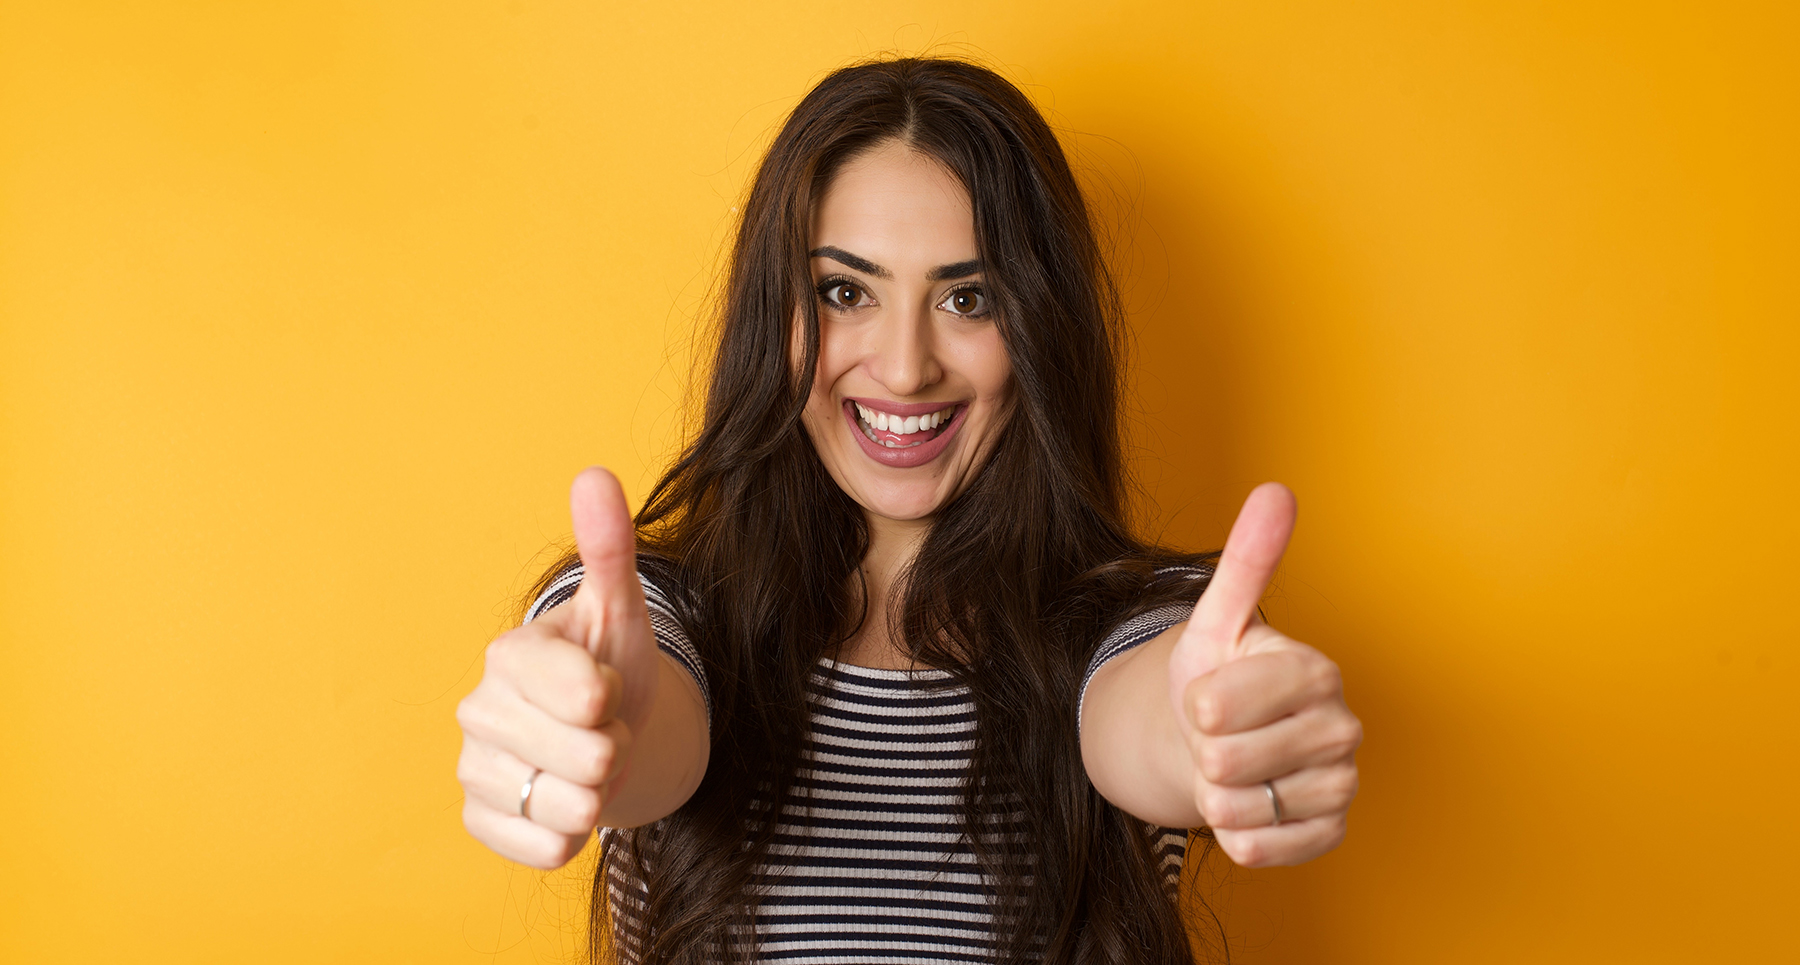 Portrait of a happy smiling blue eyed young successful woman giving two thumbs up gesture standing indoors. Positive human emotion facial expression body language.